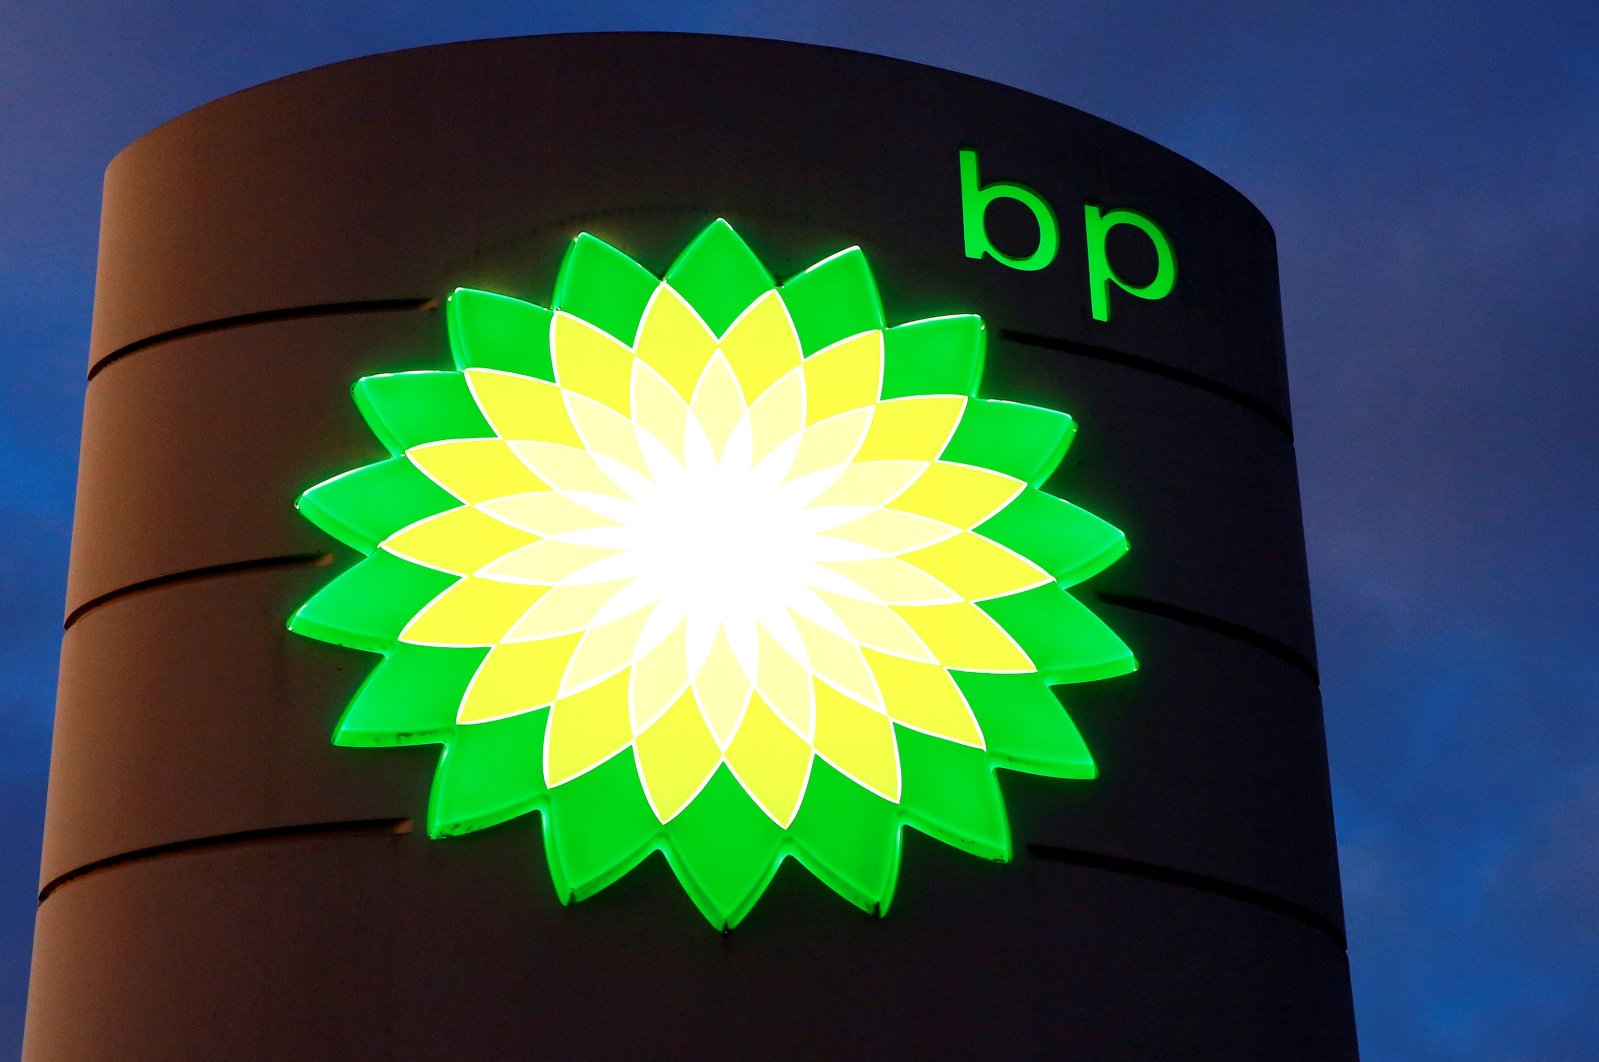 The logo of BP is seen at a petrol station in Kloten, Switzerland, Oct. 3, 2017. (Reuters Photo)